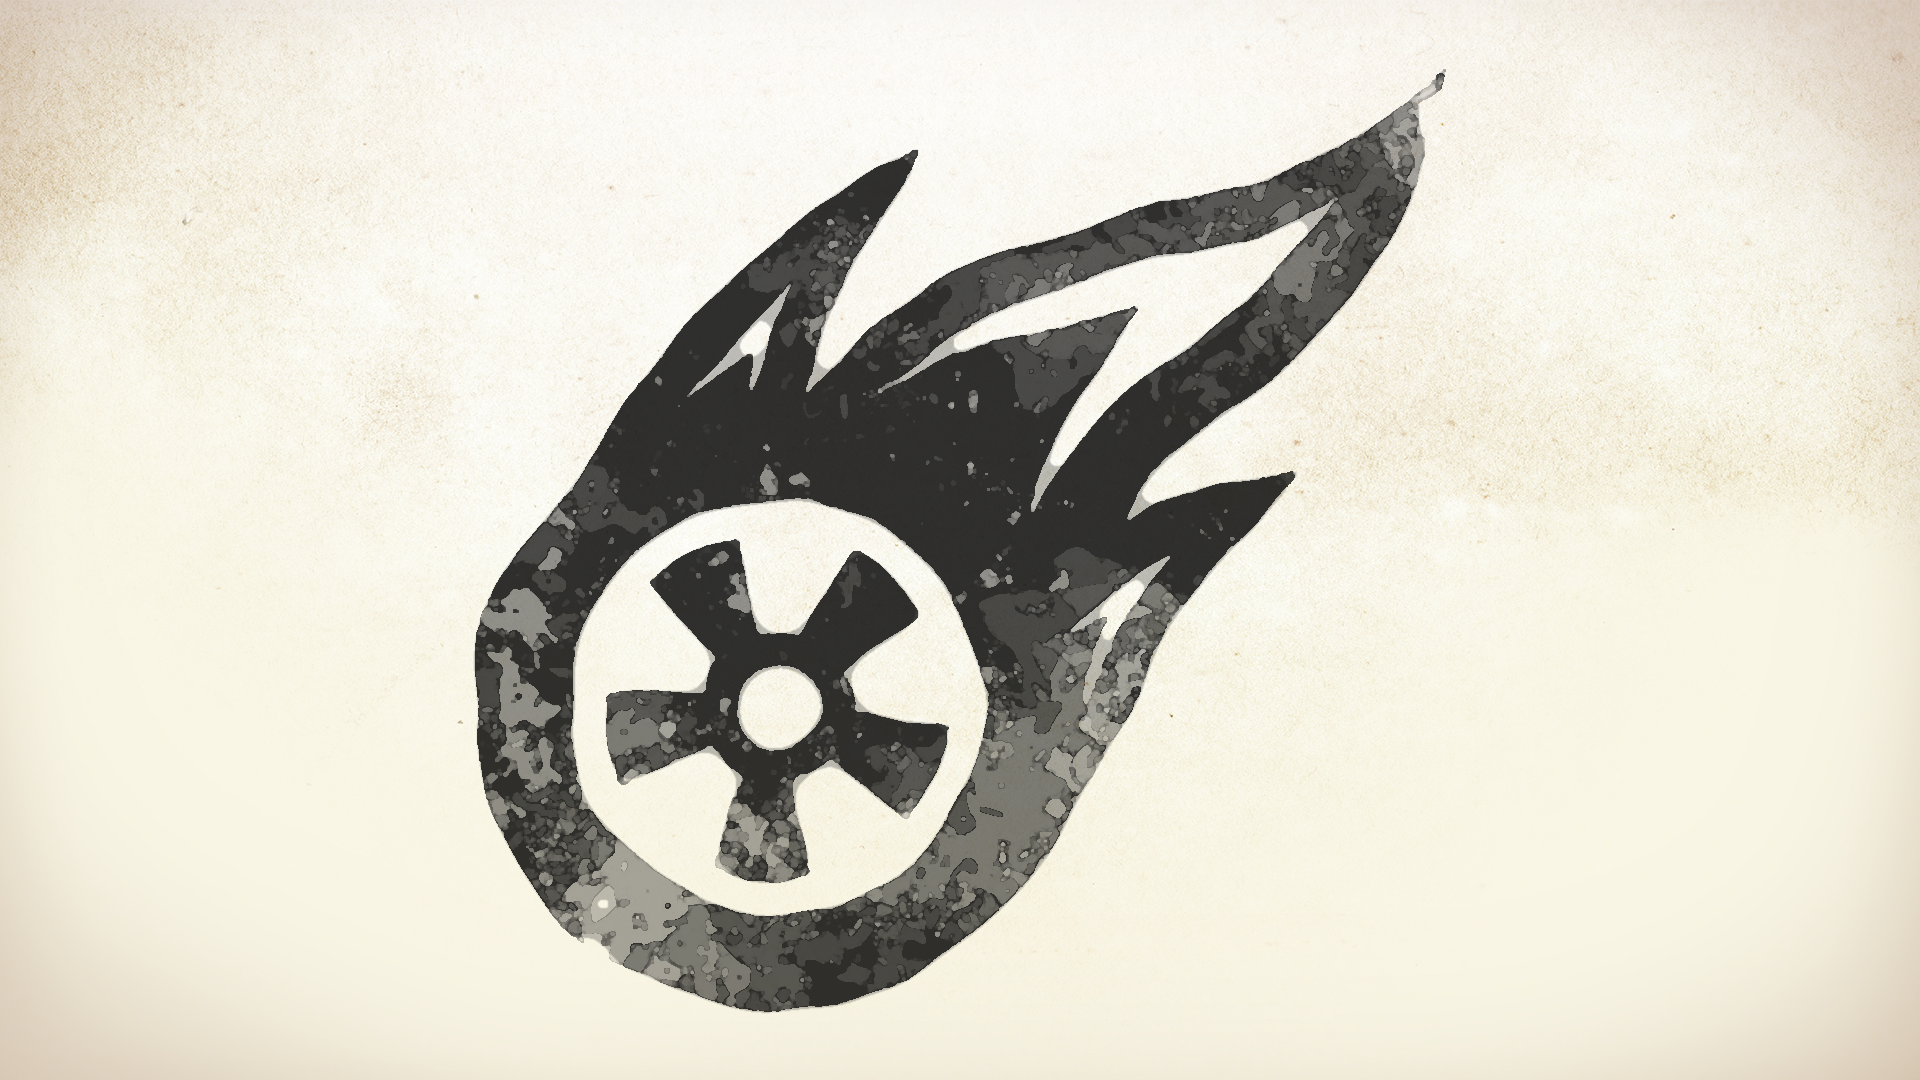 Icon for Burning Rubber